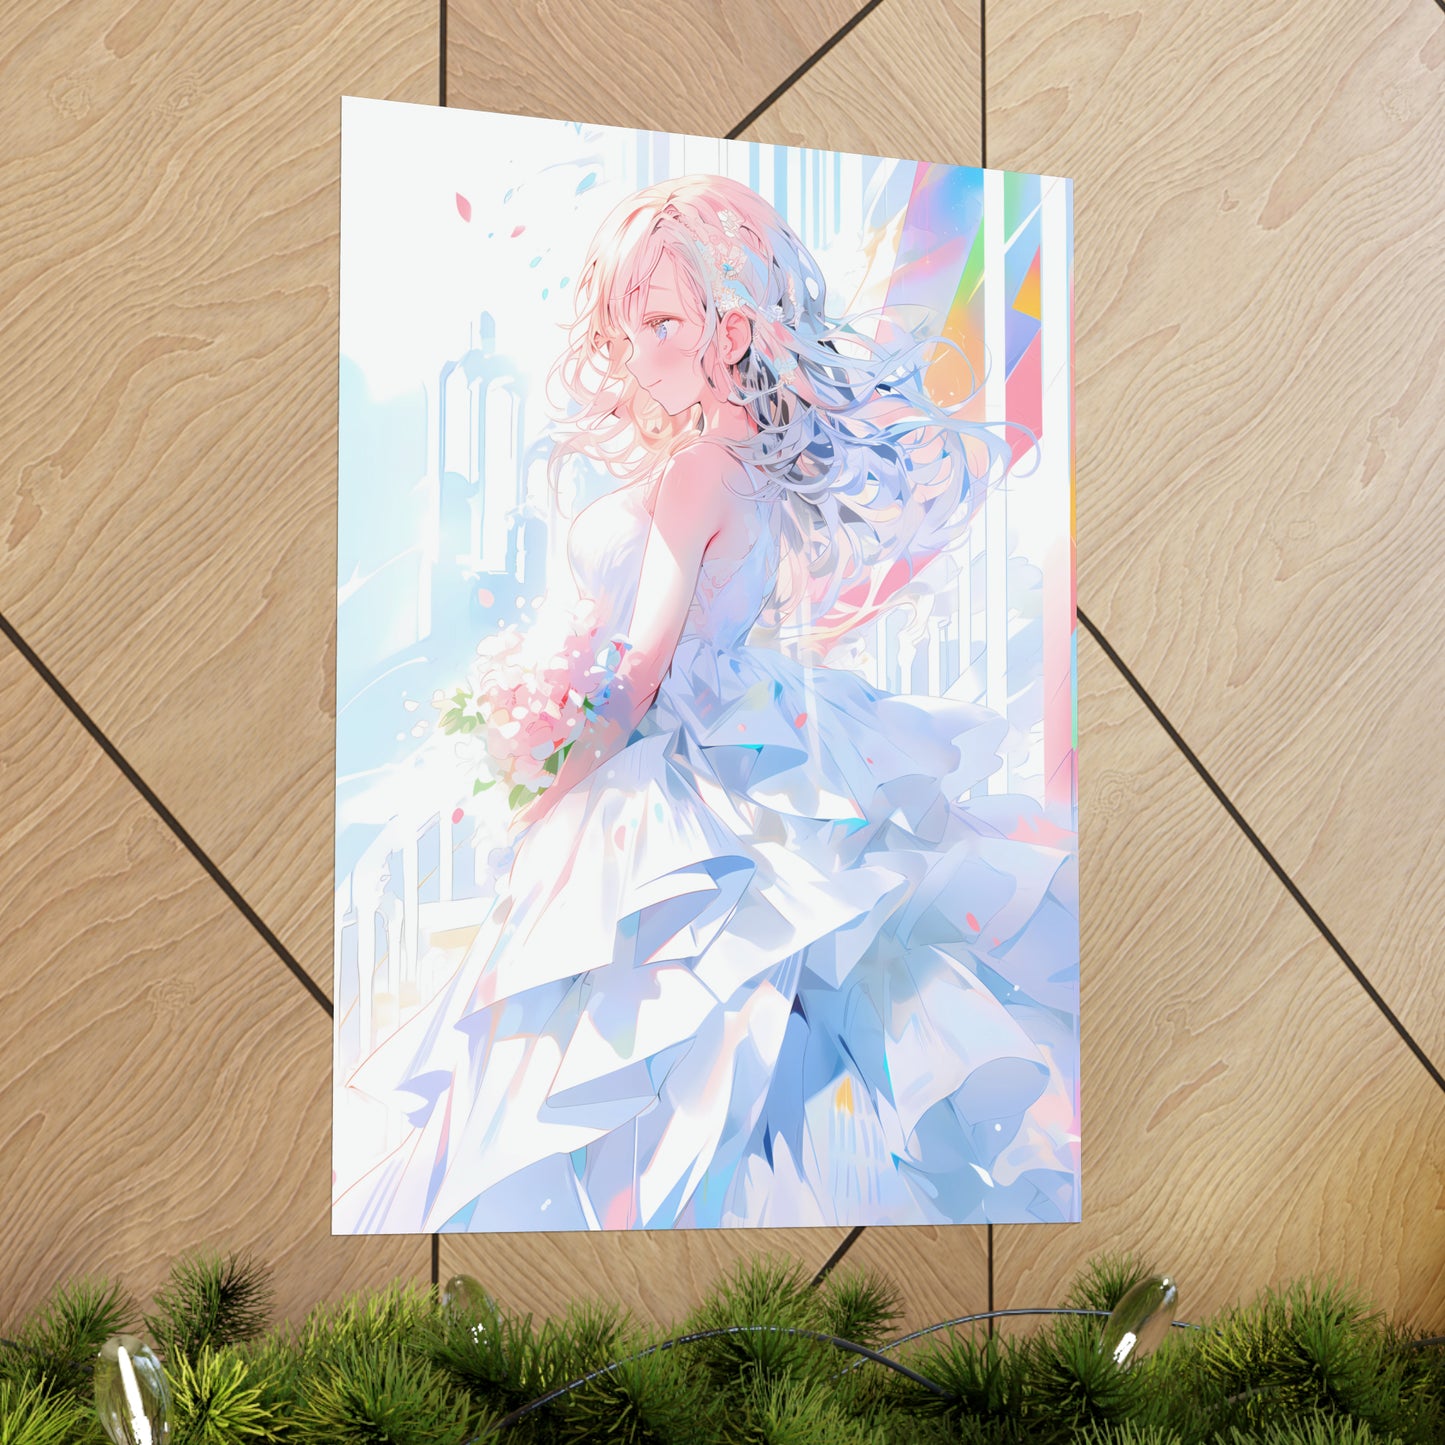 The Bride - Beautiful Anime Girl Poster